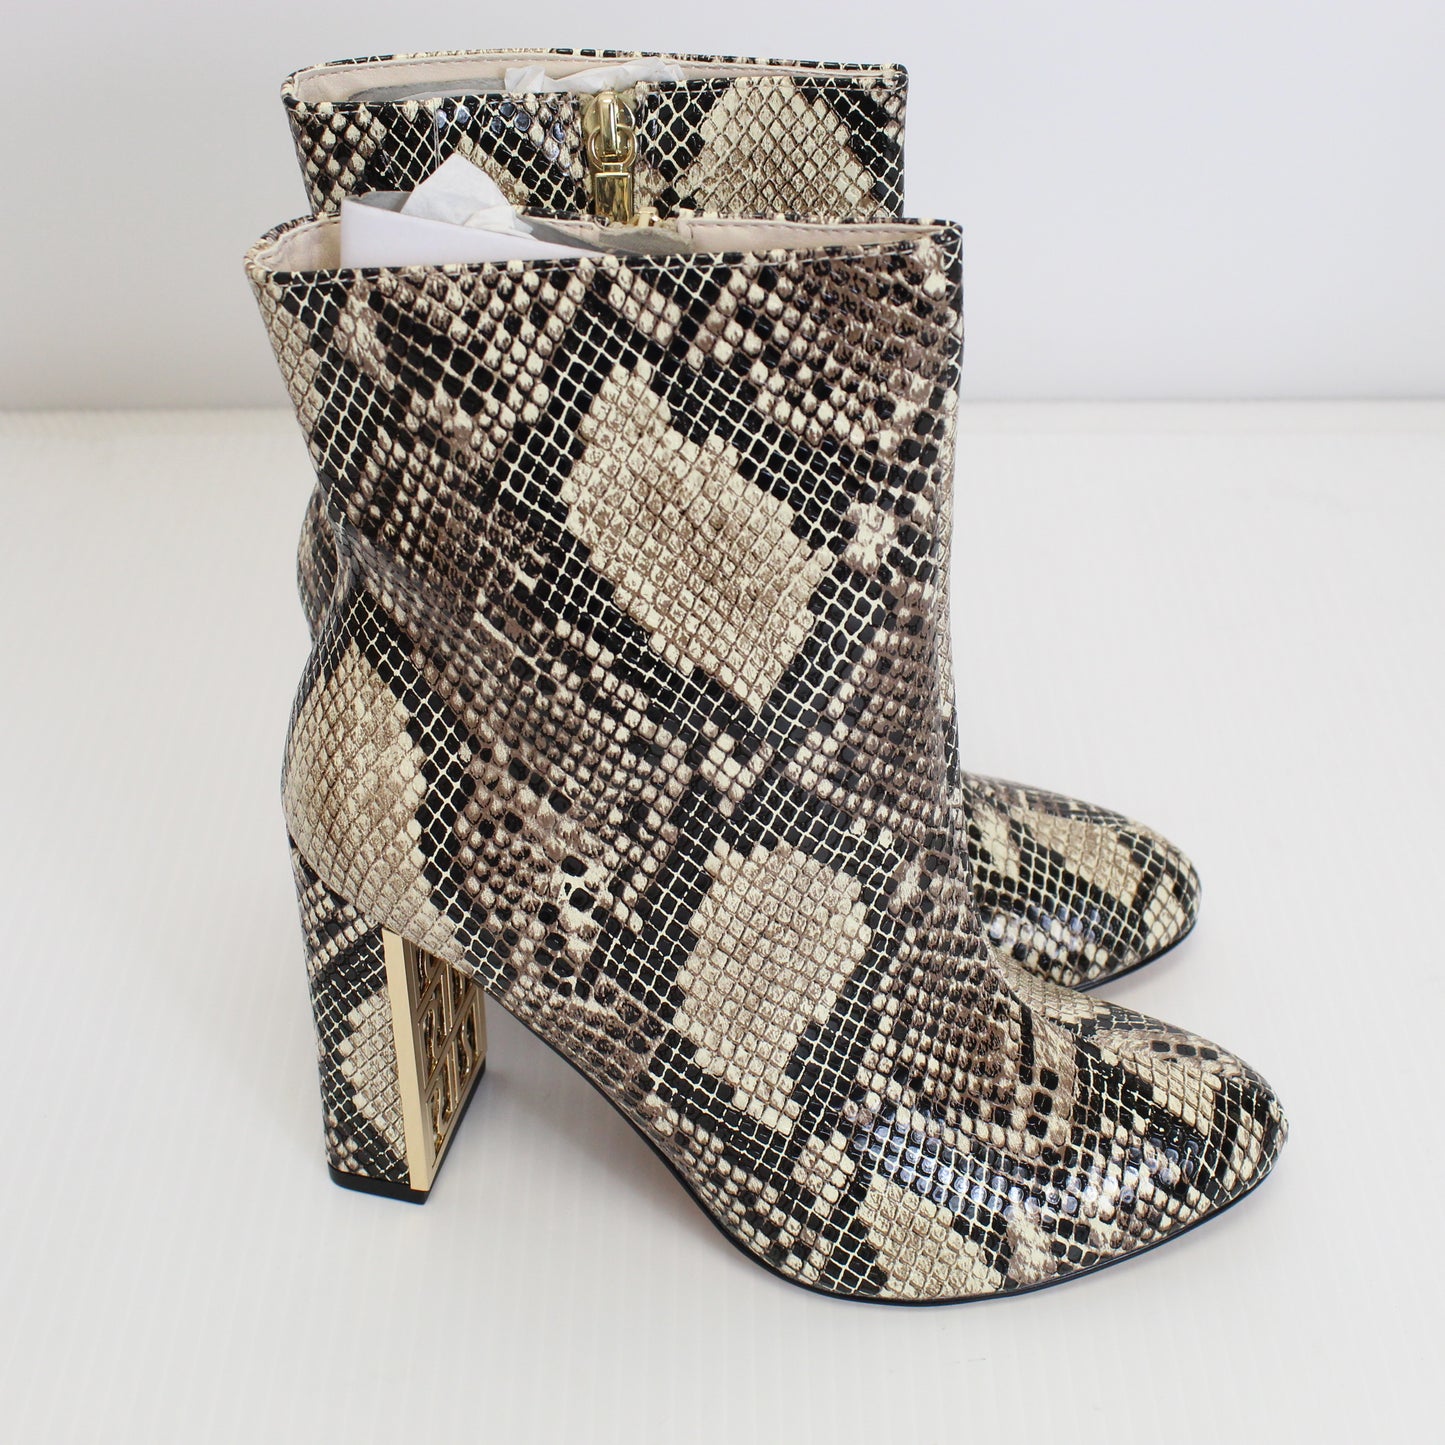 Beige/Brown Snakeskin Ankle Boots Size 4 UK and 6 UK Wide Fit